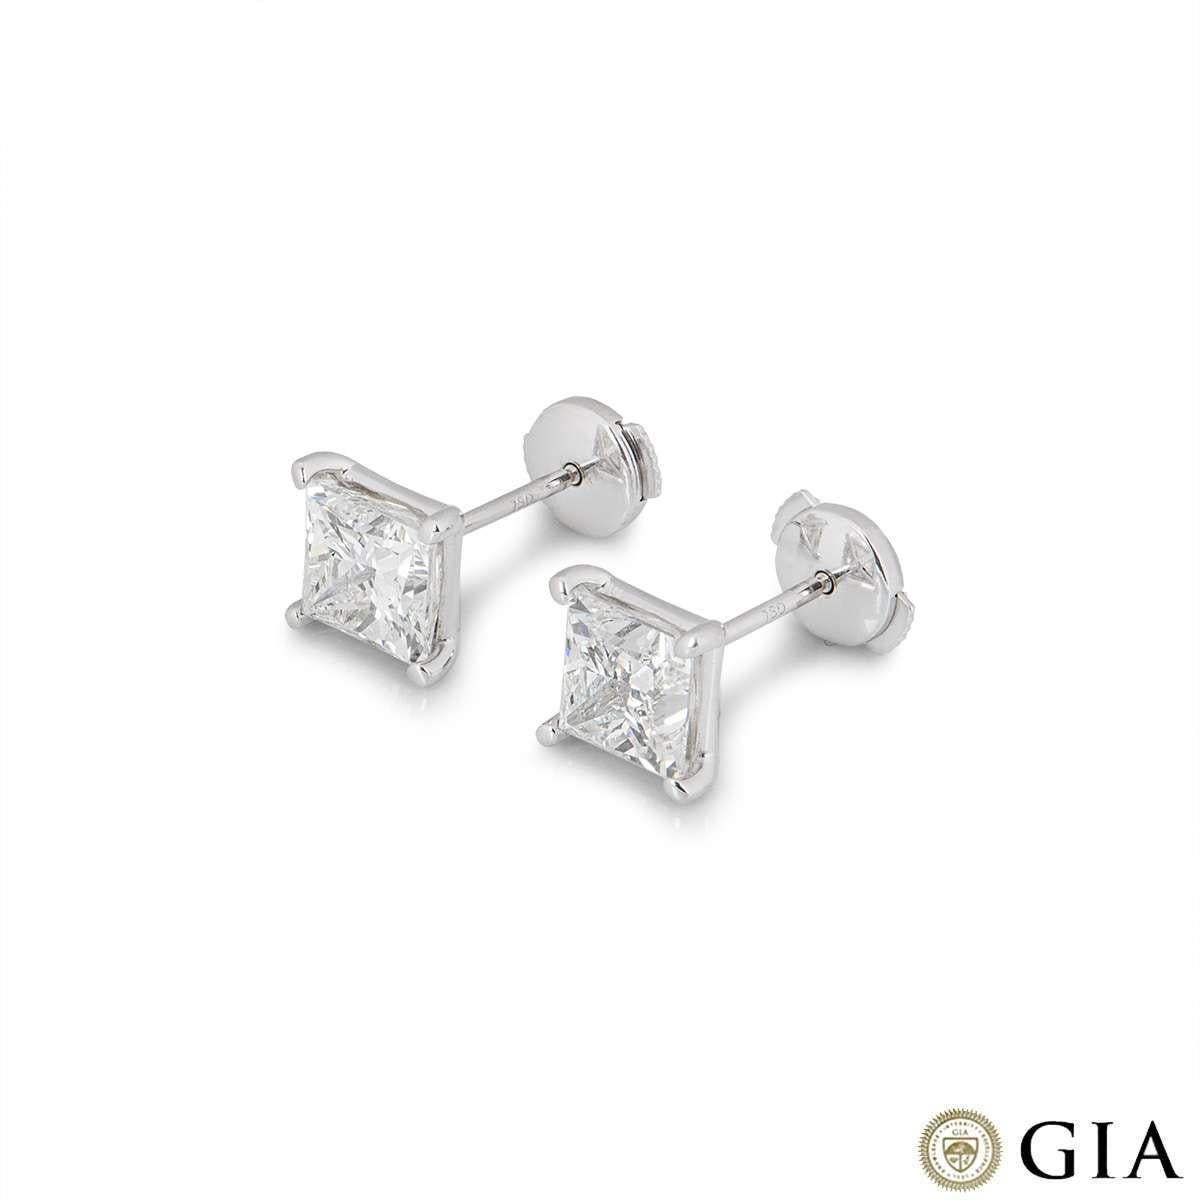 A traditional pair of diamond ear studs in platinum by Tiffany & Co. Each earring is set with a round brilliant cut diamond weighing 0.62ct, I colour and SI1 in clarity, set in a classic four claw setting. The earrings feature post and screw back